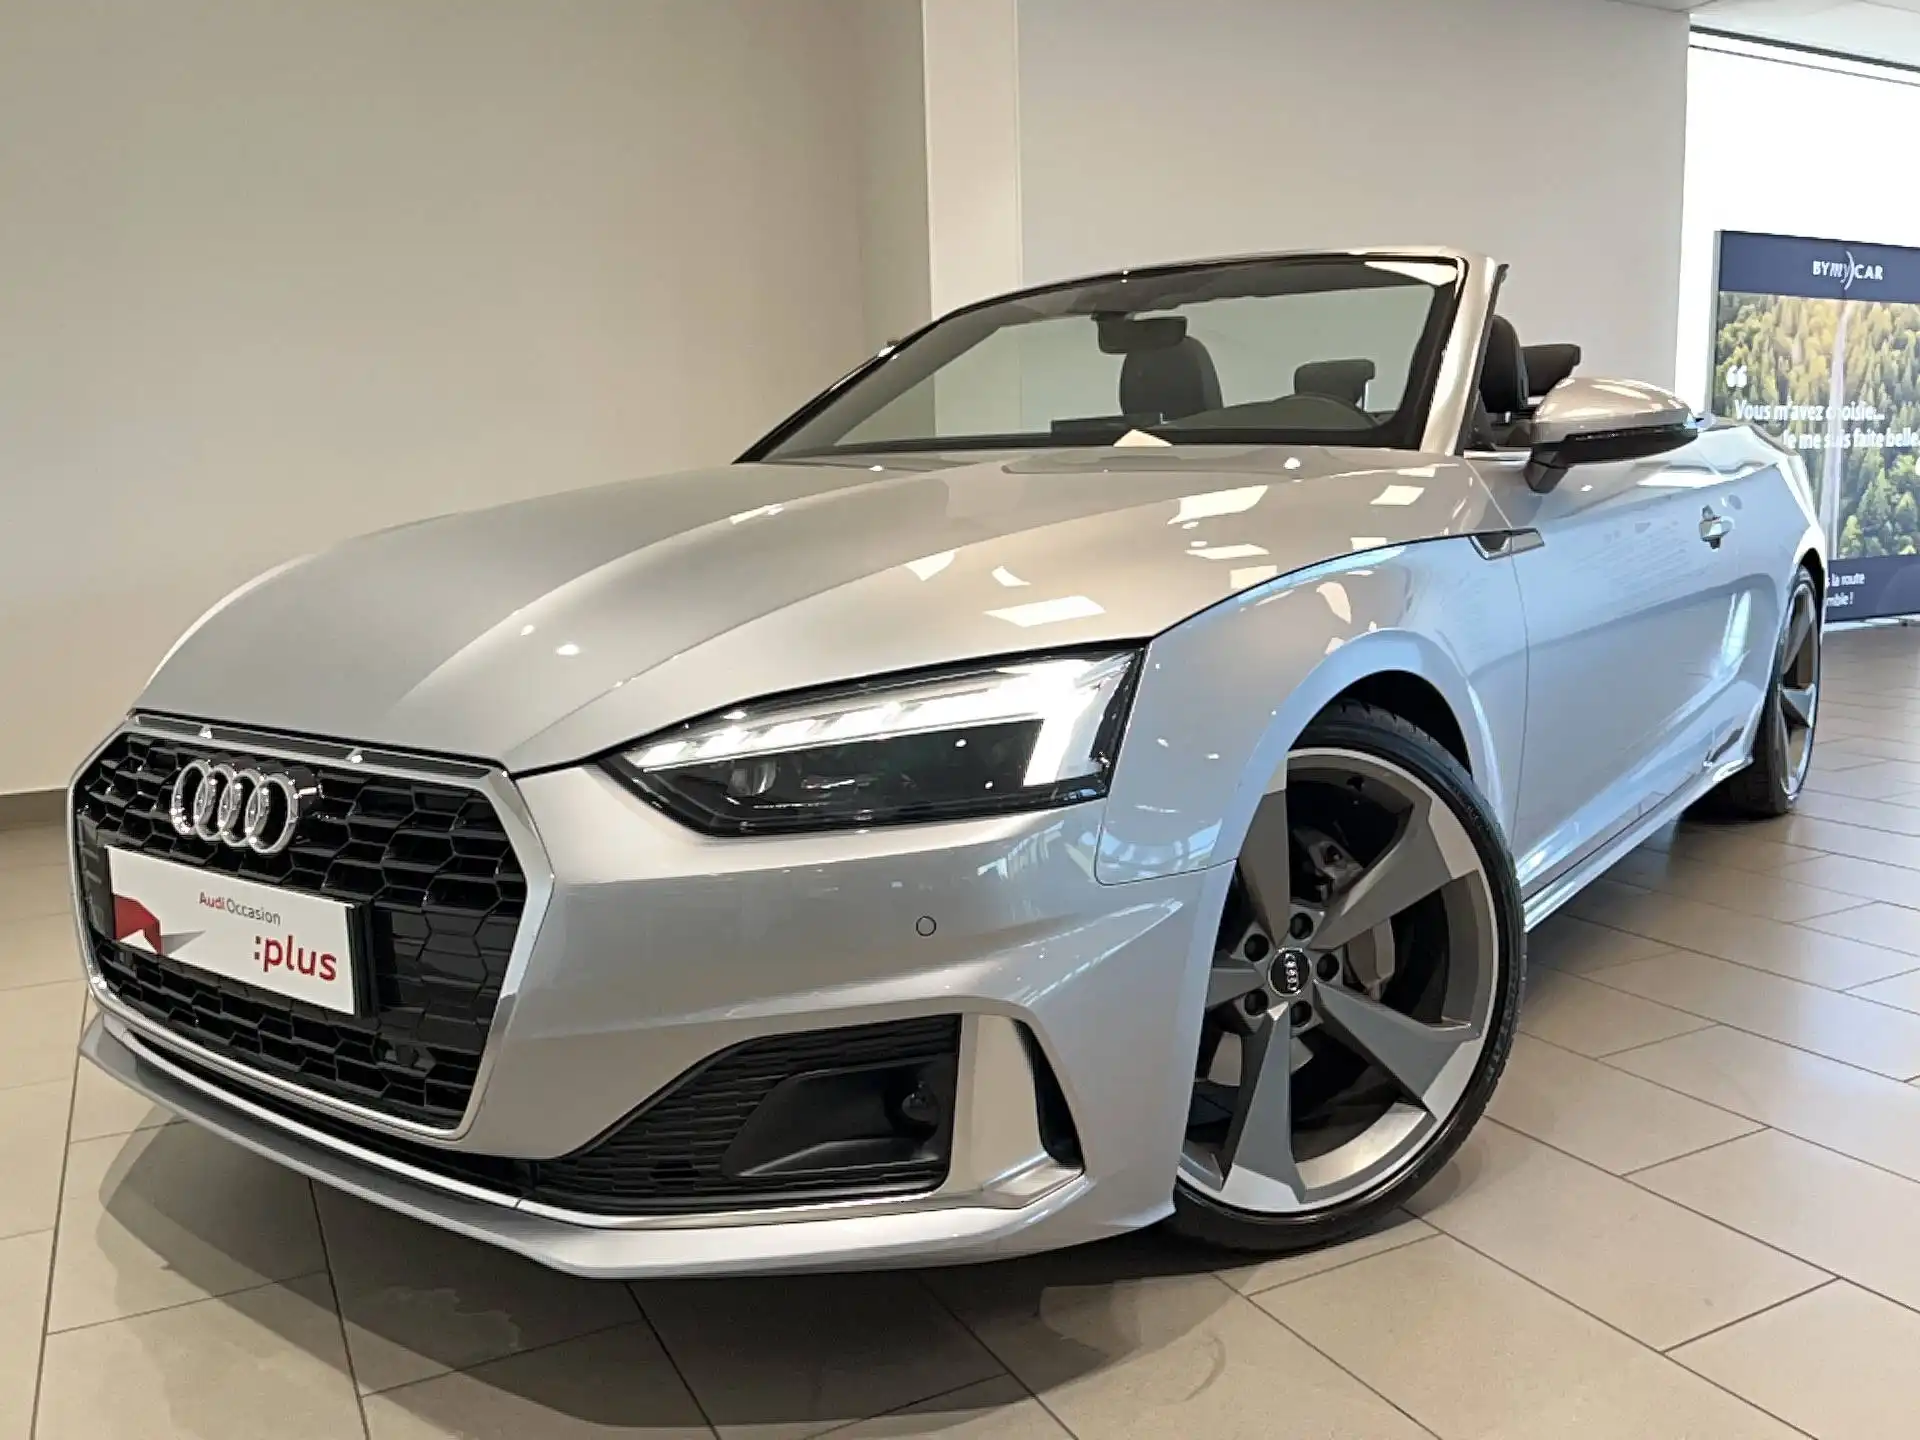 A5 Cabriolet 40 TDI 204 S tronic 7